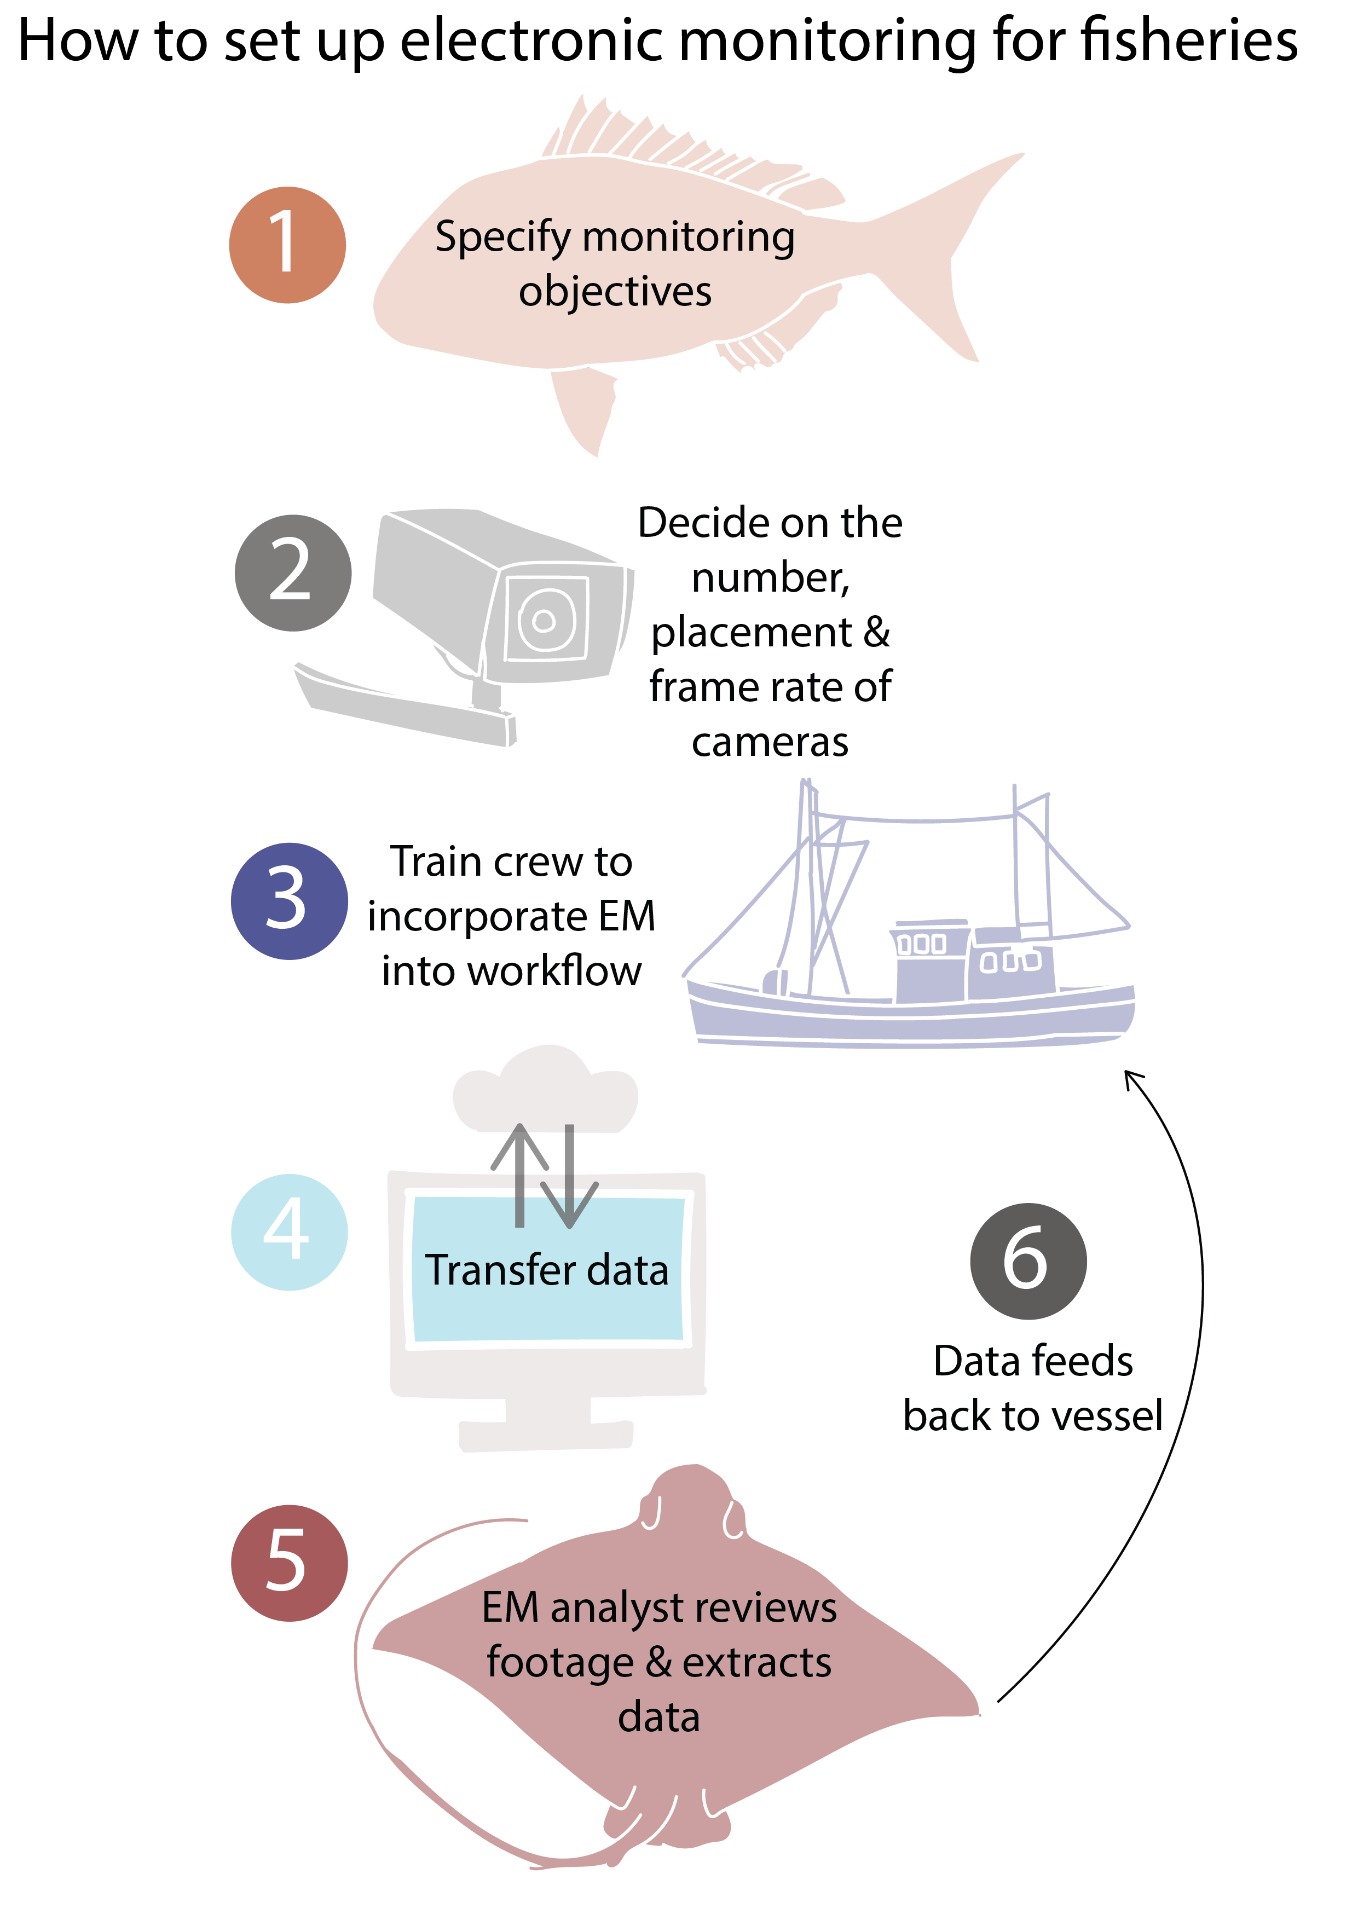 How to set up electronic monitoring for fisehries: 1) Specify monitoring objectives, 2) Decide on the number, placement and frame rate of cameras, 3) Train crew to incorporate EM into workflow, 4) Transfer data, 5) EM analyst reviews footage and extracts data, 6) data feeds back to vessel.